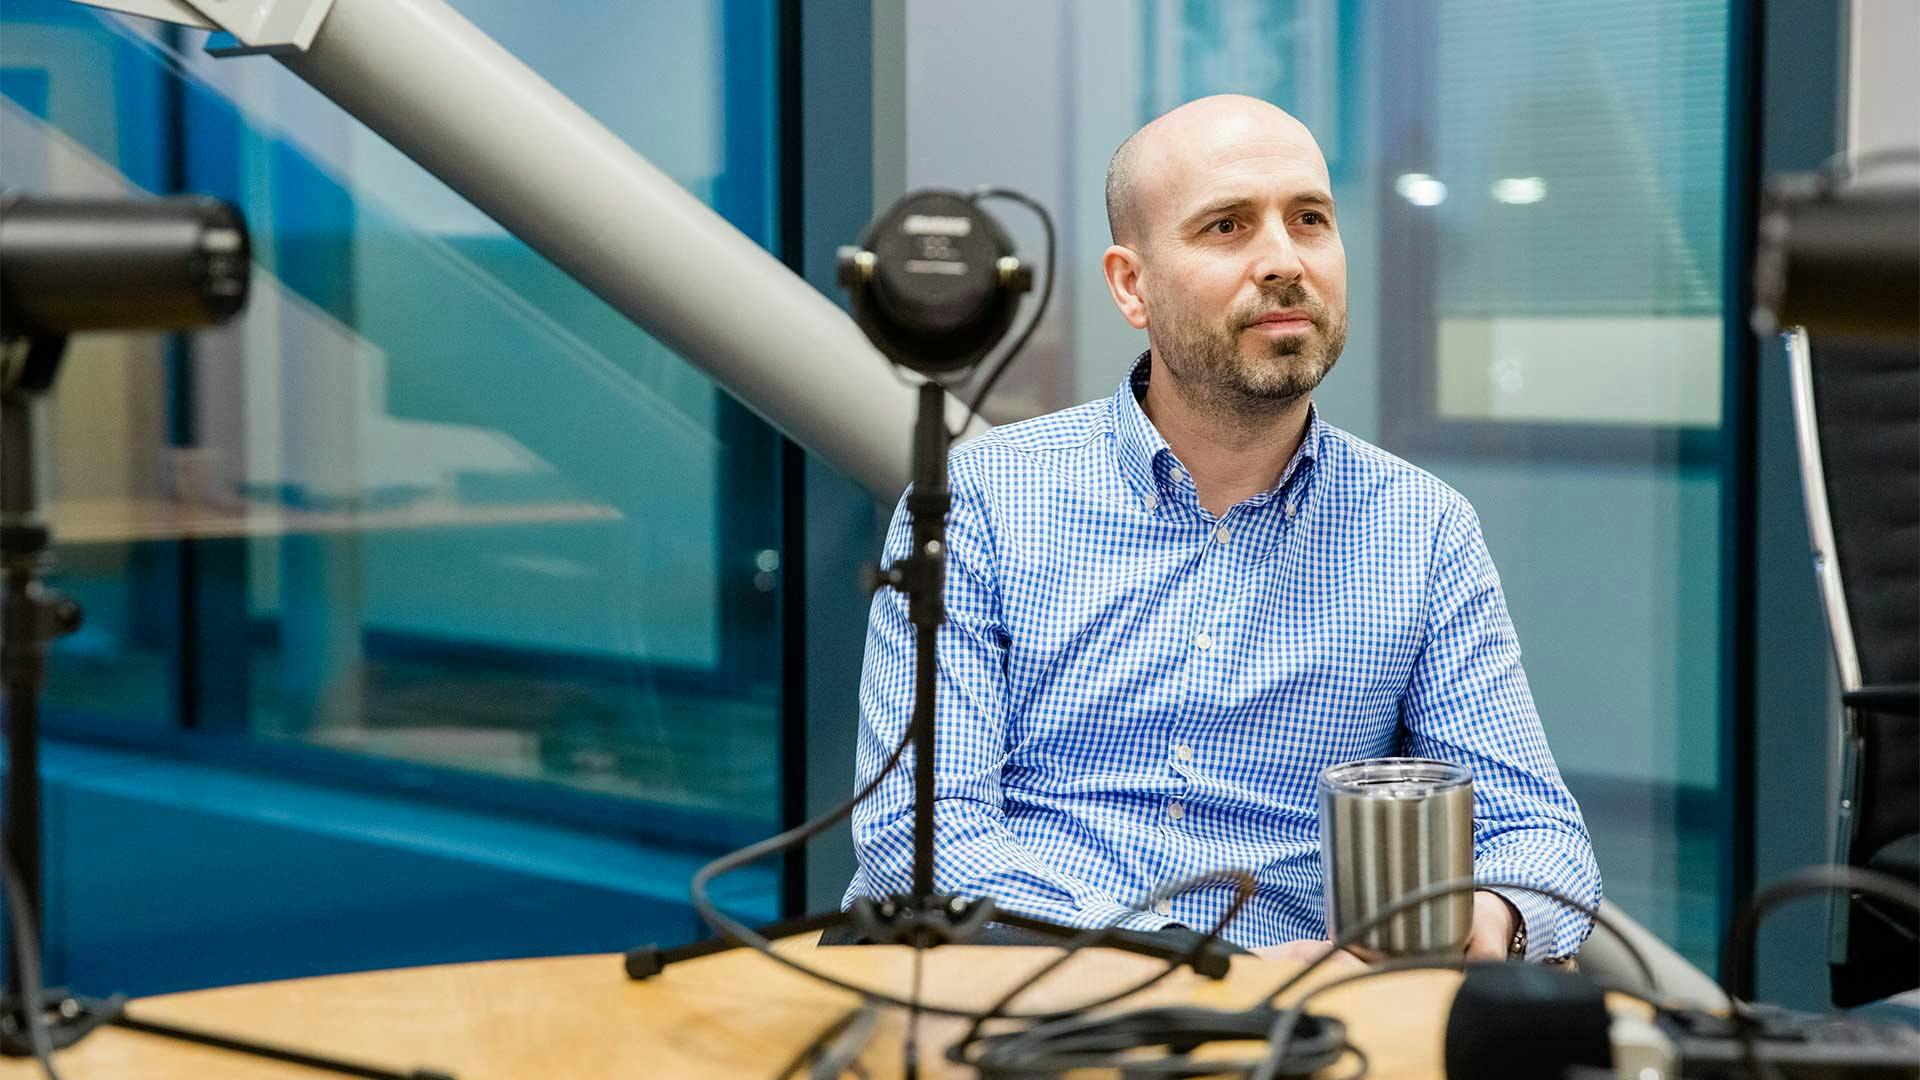 Image of a man during podcast